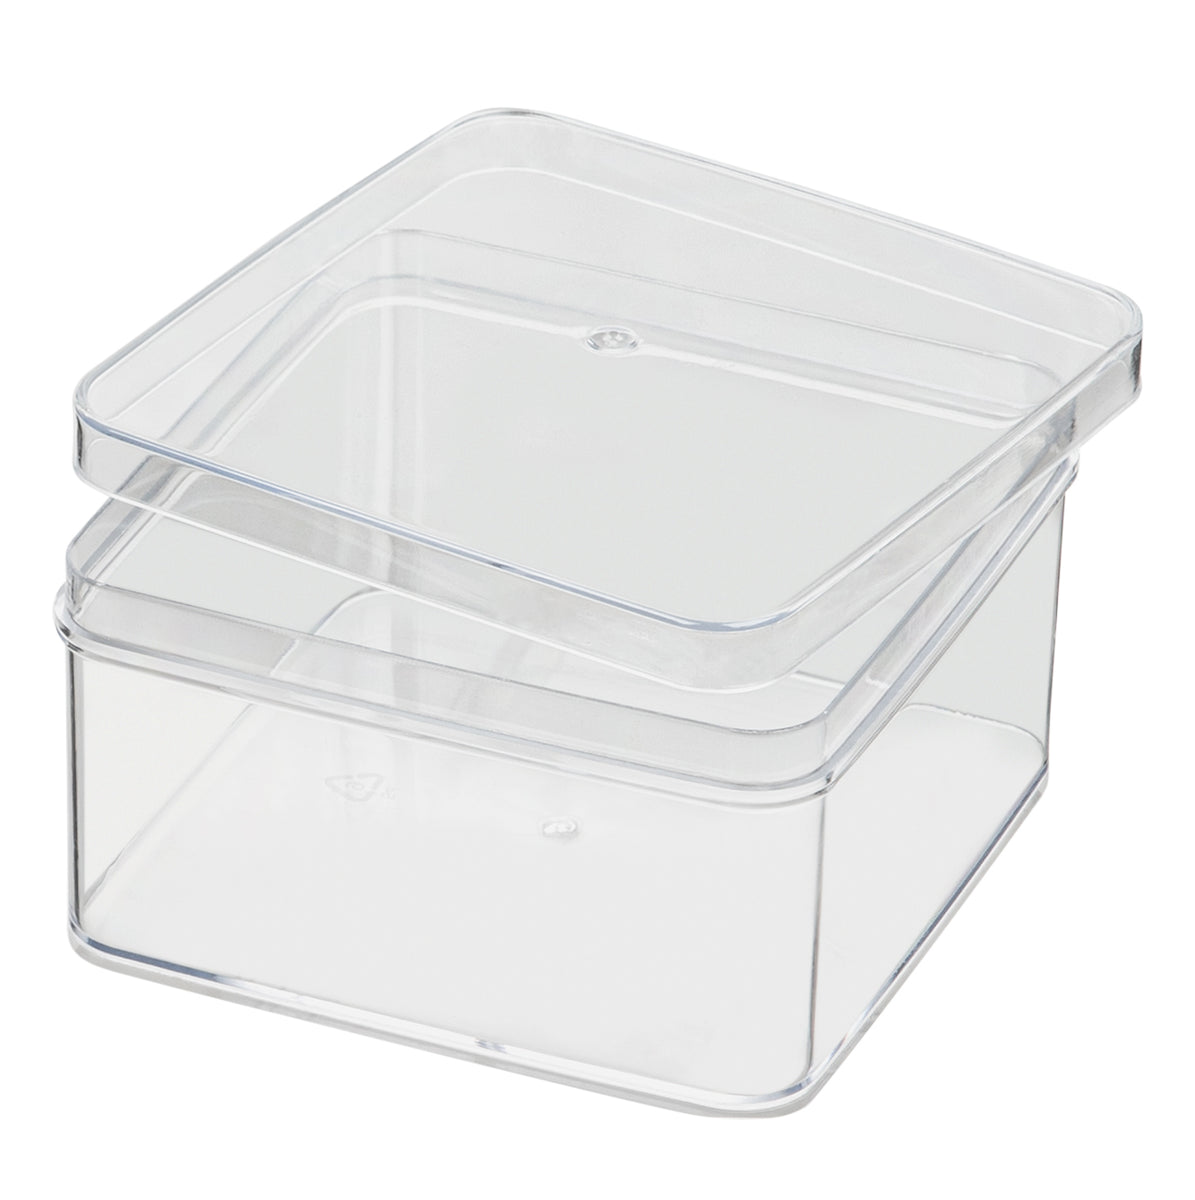 Clear acrylic container with lid, container store acrylic box